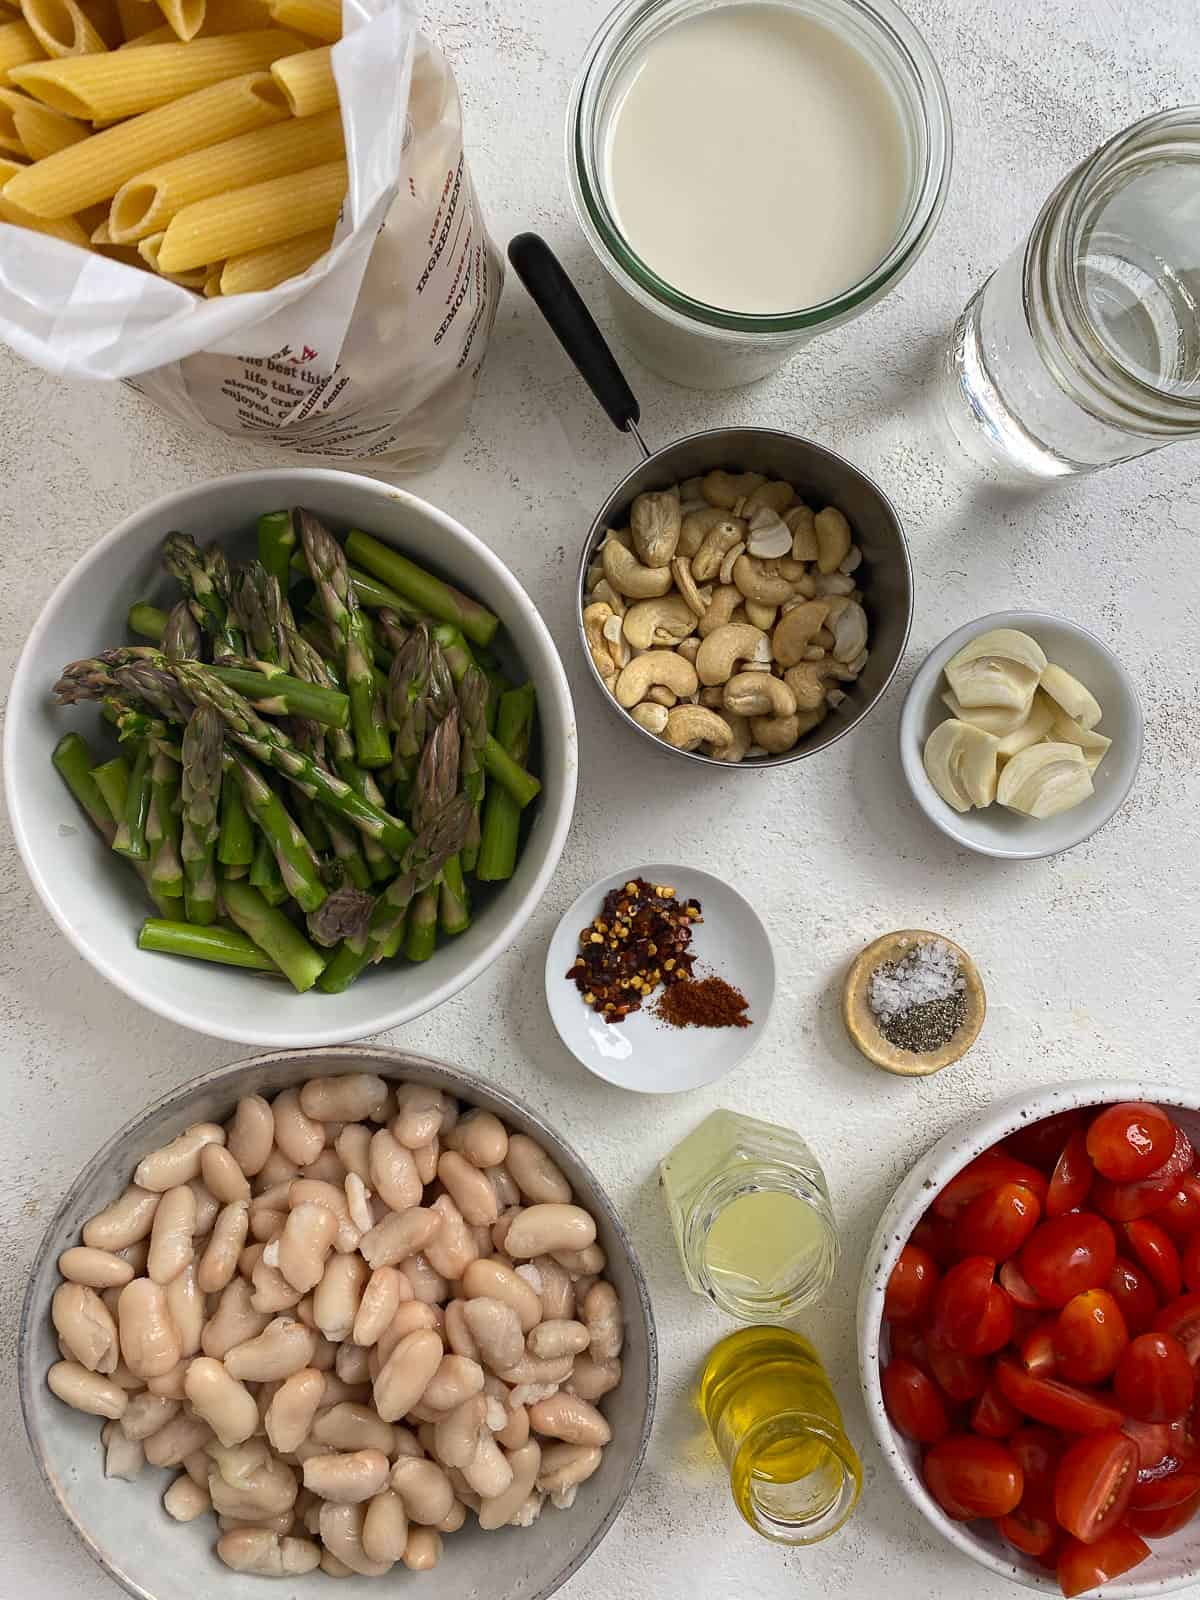 ingredients for Vegan Pasta Primavera Recipe measured out on a white surface